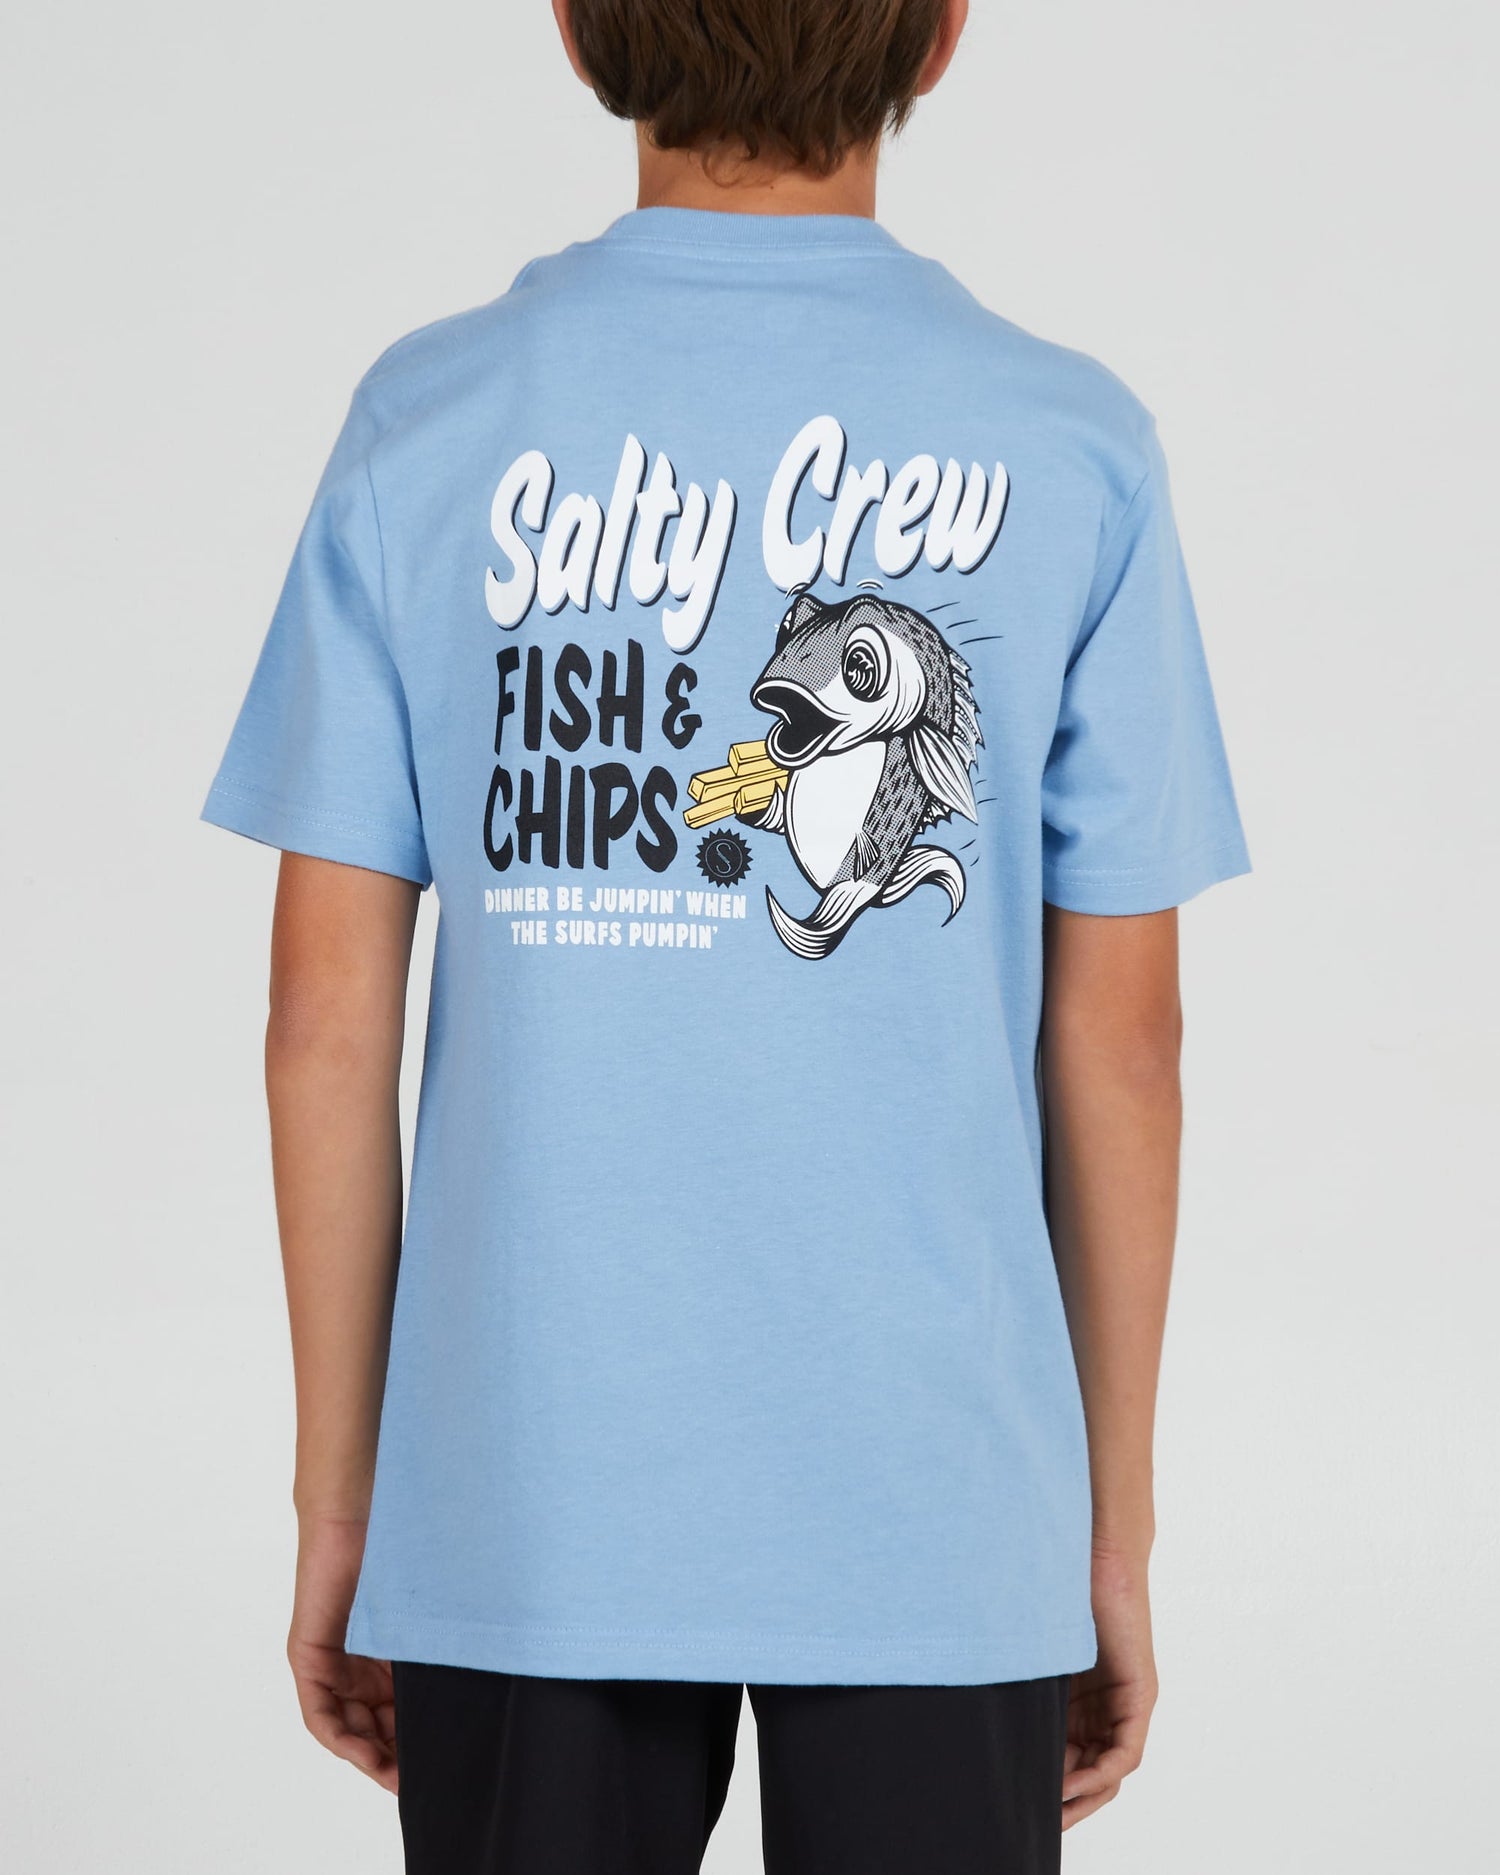 Salty crew T-SHIRTS S/S FISH AND CHIPS BOYS S/S TEE - Marine Blue in Marine Blue